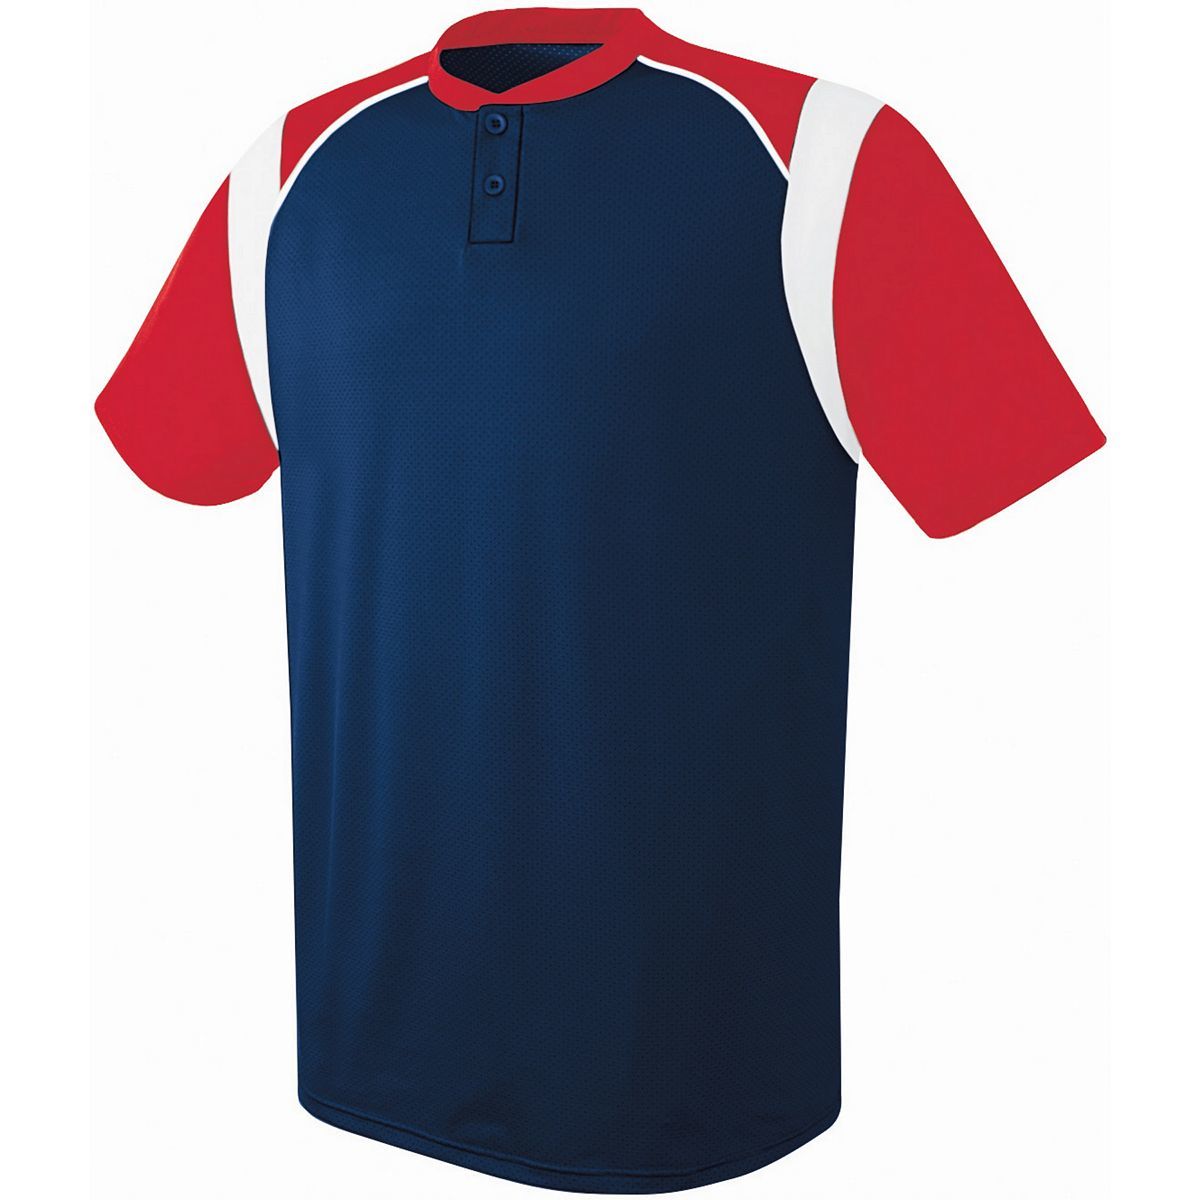 Wildcard Two-Button Jersey 312200